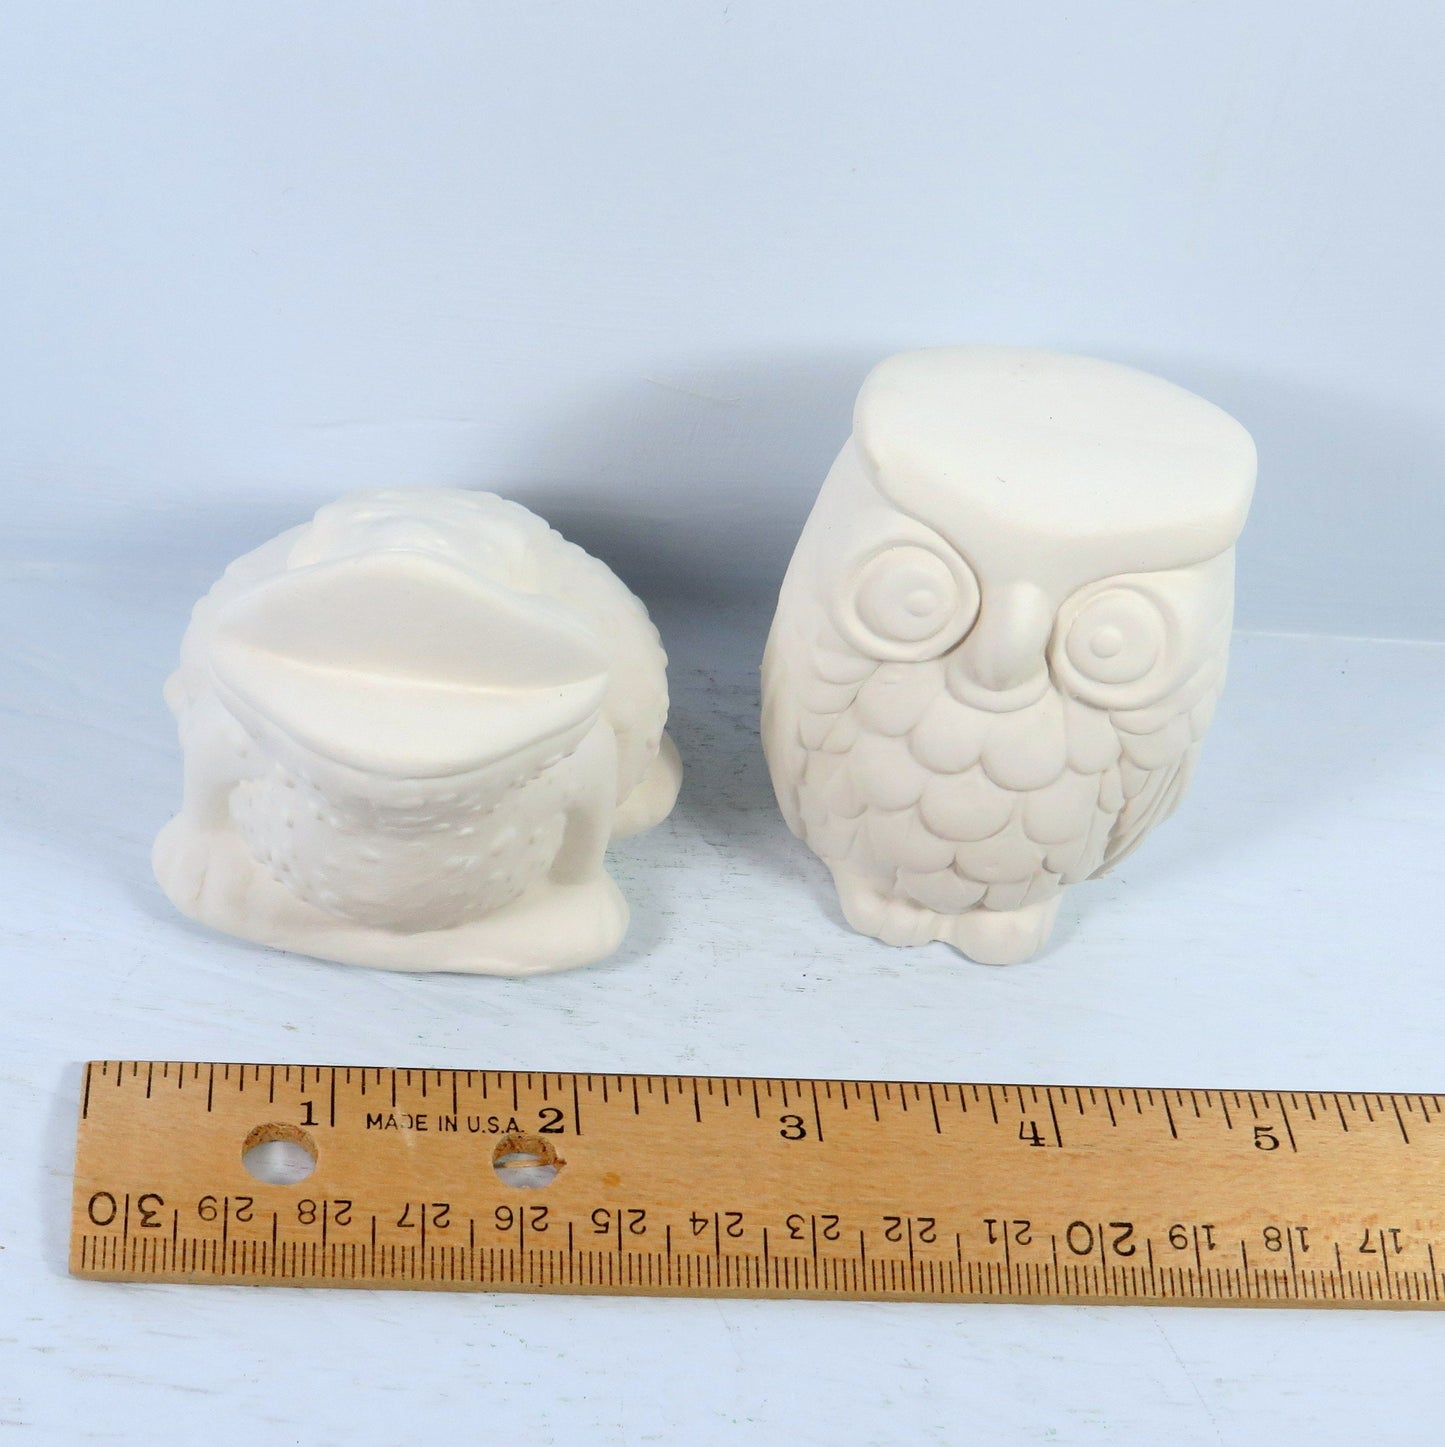 Handmade Ceramic Bisque Owl and Frog Figurines / Unpainted Owl Statue / Ready to Paint Frog Statue / Ceramics to Paint / Owl Decor / Frog